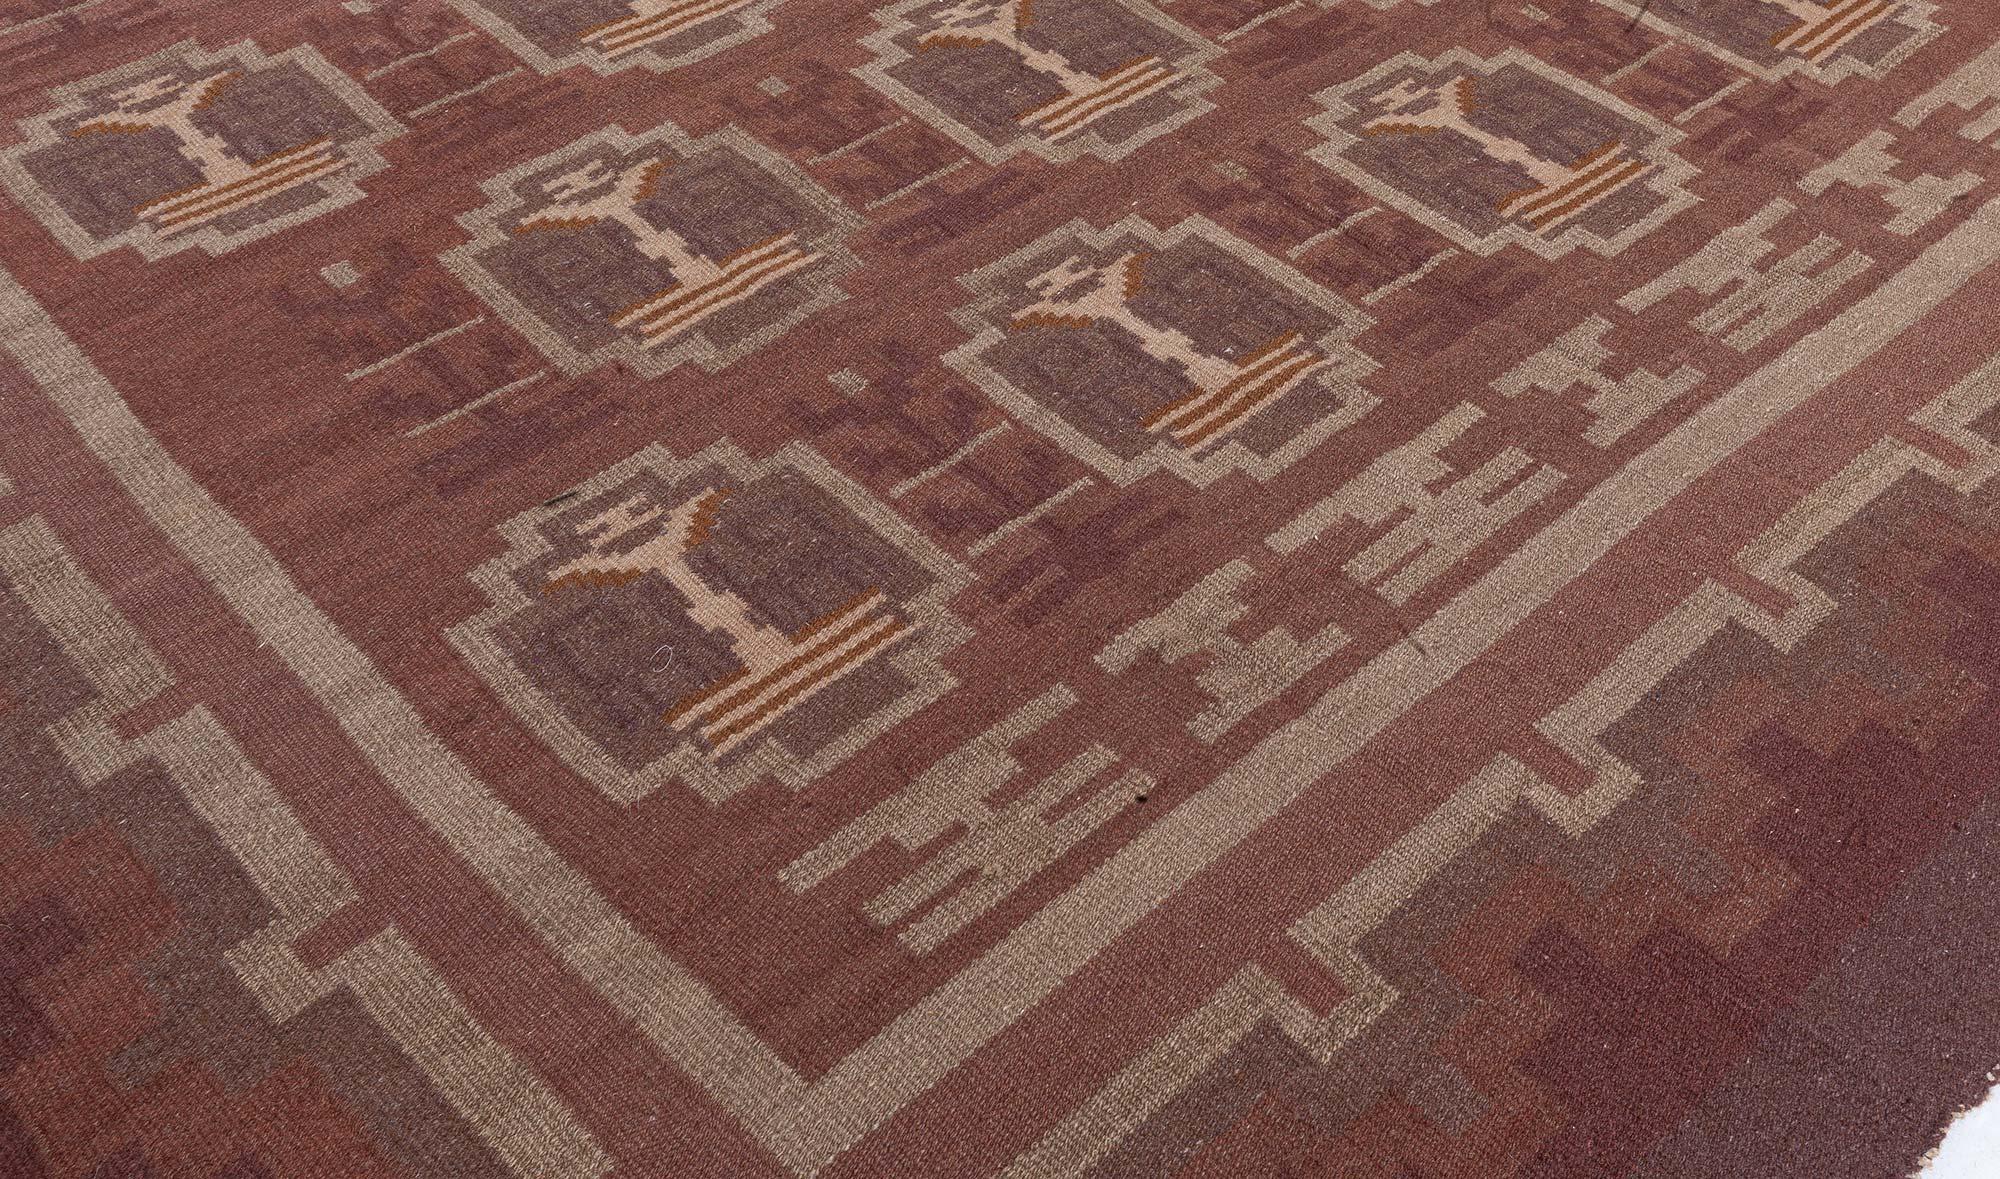 Mid-20th Century Swedish Chocolate Brown Flat-weave Wool Rug In Good Condition For Sale In New York, NY